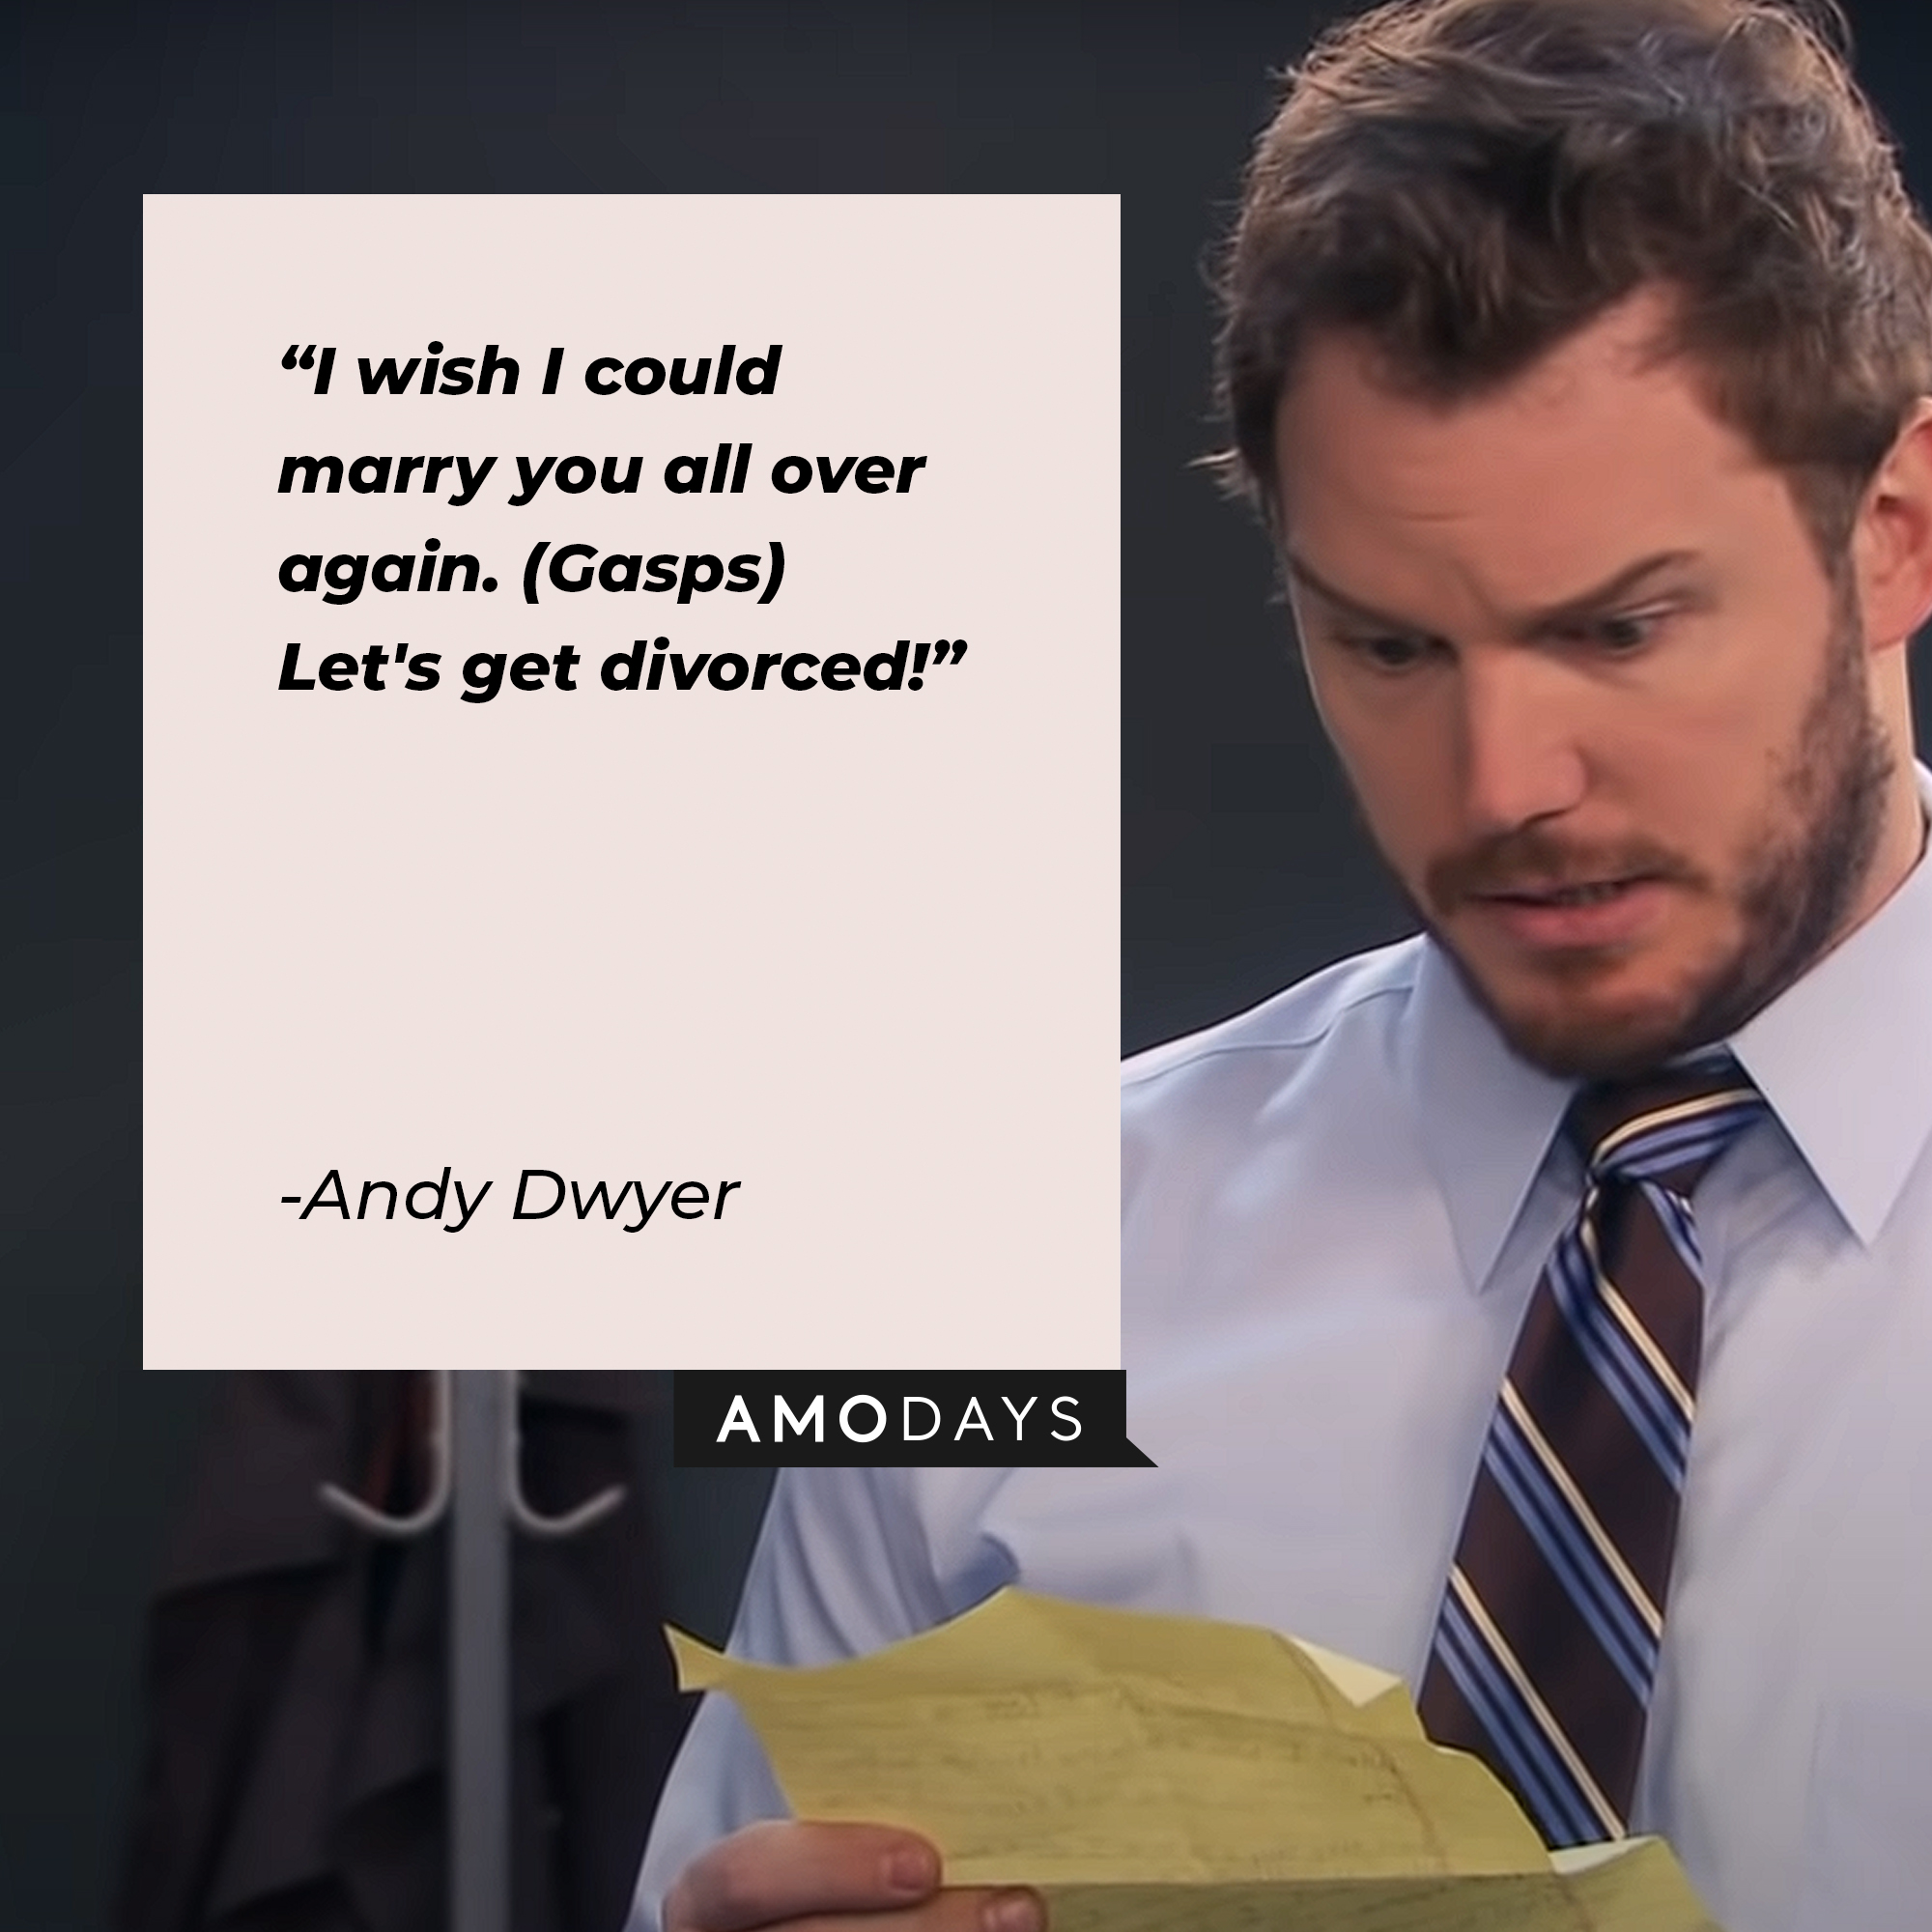 “I wish I could marry you all over again. (Gasps) Let's get divorced!” | Source: youtube.com/ParksandRecreation